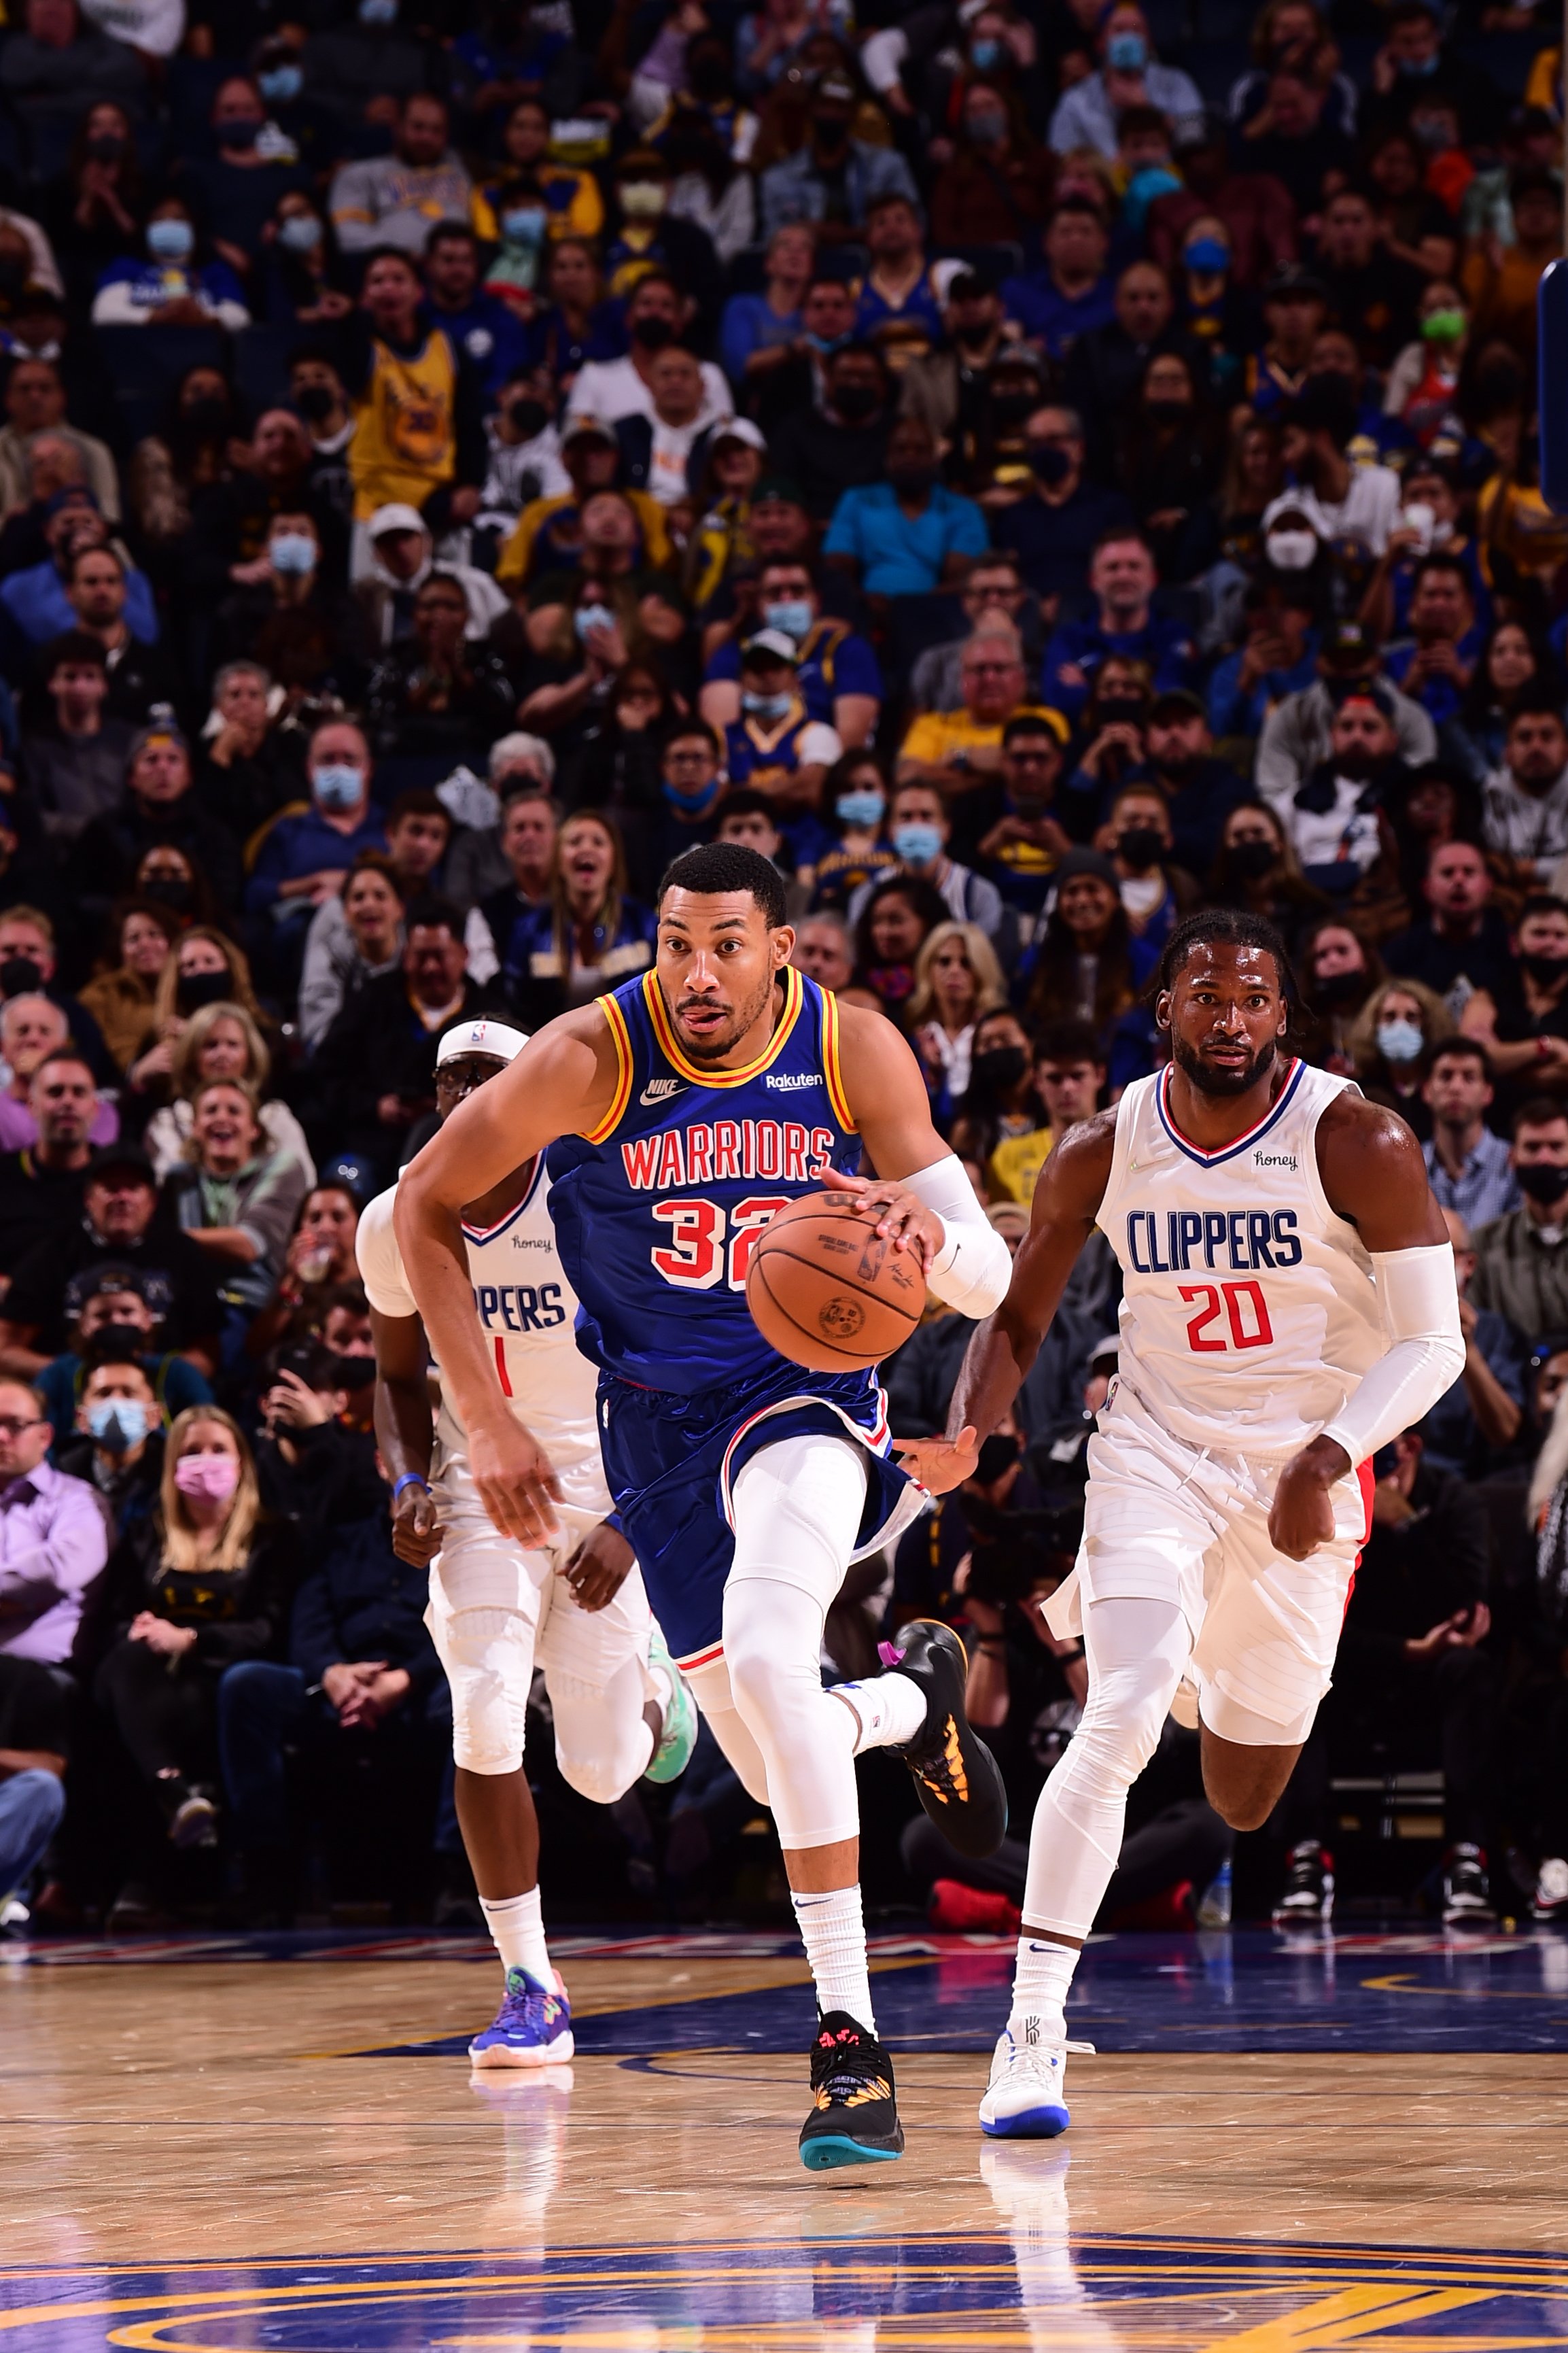 Otto Porter Jr. #32 of the Golden State Warriors dribbles the ball during the game against the LA Clippers on October 21, 2021 at Chase Center in San Francisco, California | Photo: Getty Images